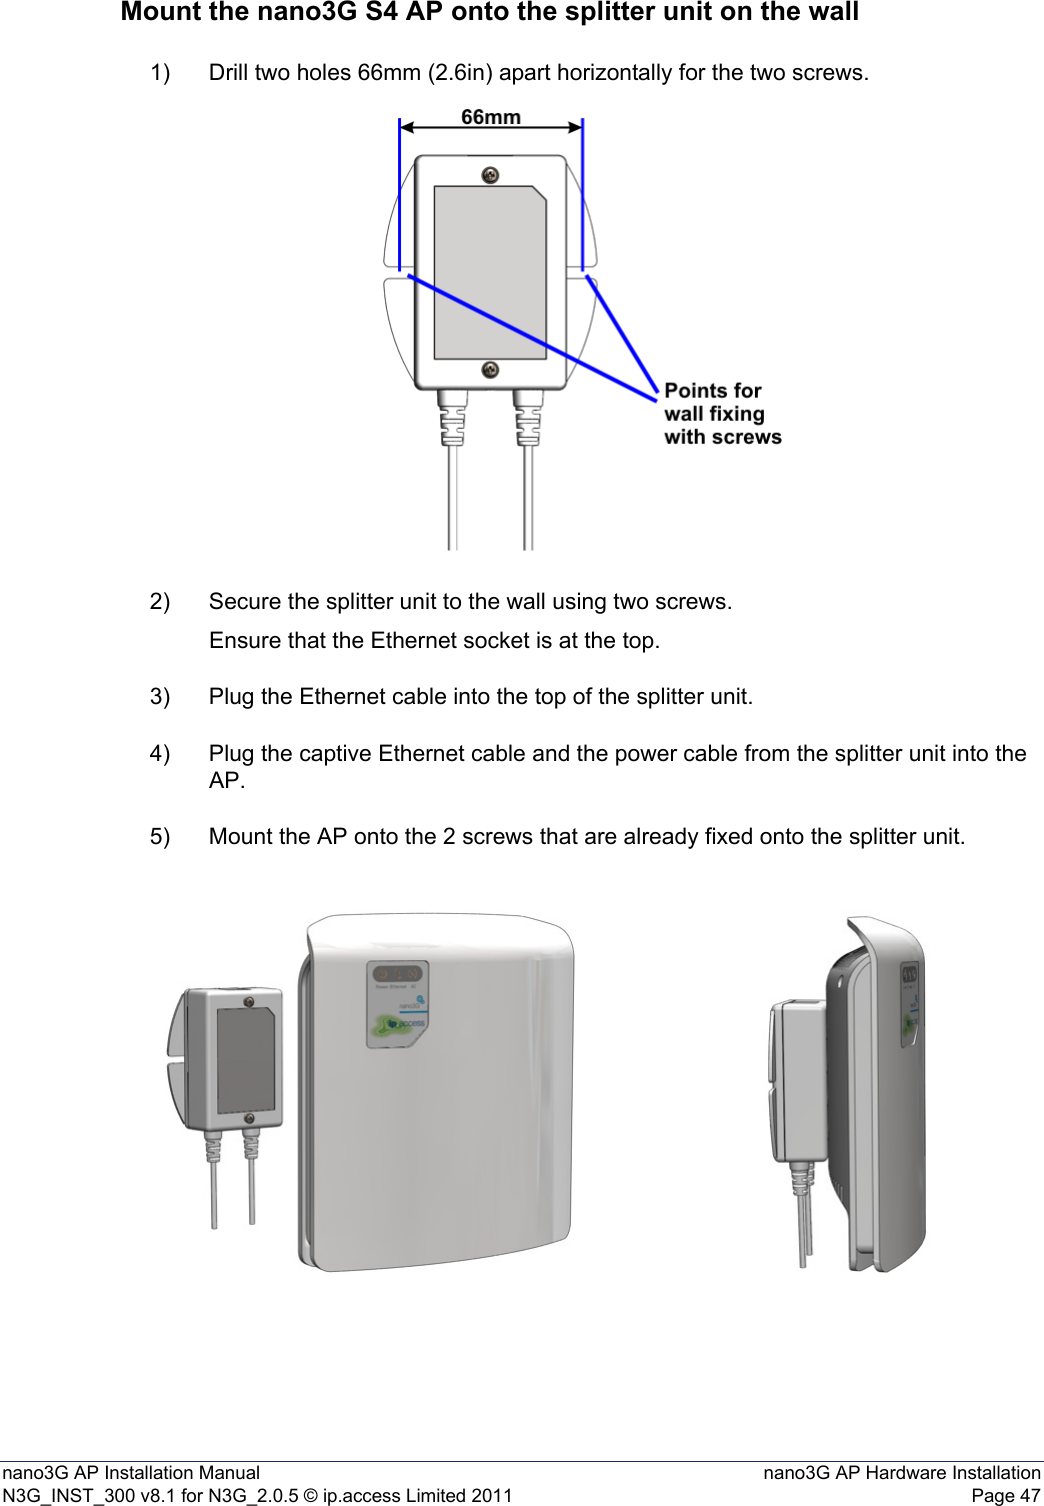 nano3G AP Installation Manual nano3G AP Hardware InstallationN3G_INST_300 v8.1 for N3G_2.0.5 © ip.access Limited 2011 Page 47Mount the nano3G S4 AP onto the splitter unit on the wall1) Drill two holes 66mm (2.6in) apart horizontally for the two screws.2) Secure the splitter unit to the wall using two screws.Ensure that the Ethernet socket is at the top.3) Plug the Ethernet cable into the top of the splitter unit.4) Plug the captive Ethernet cable and the power cable from the splitter unit into the AP.5) Mount the AP onto the 2 screws that are already fixed onto the splitter unit.